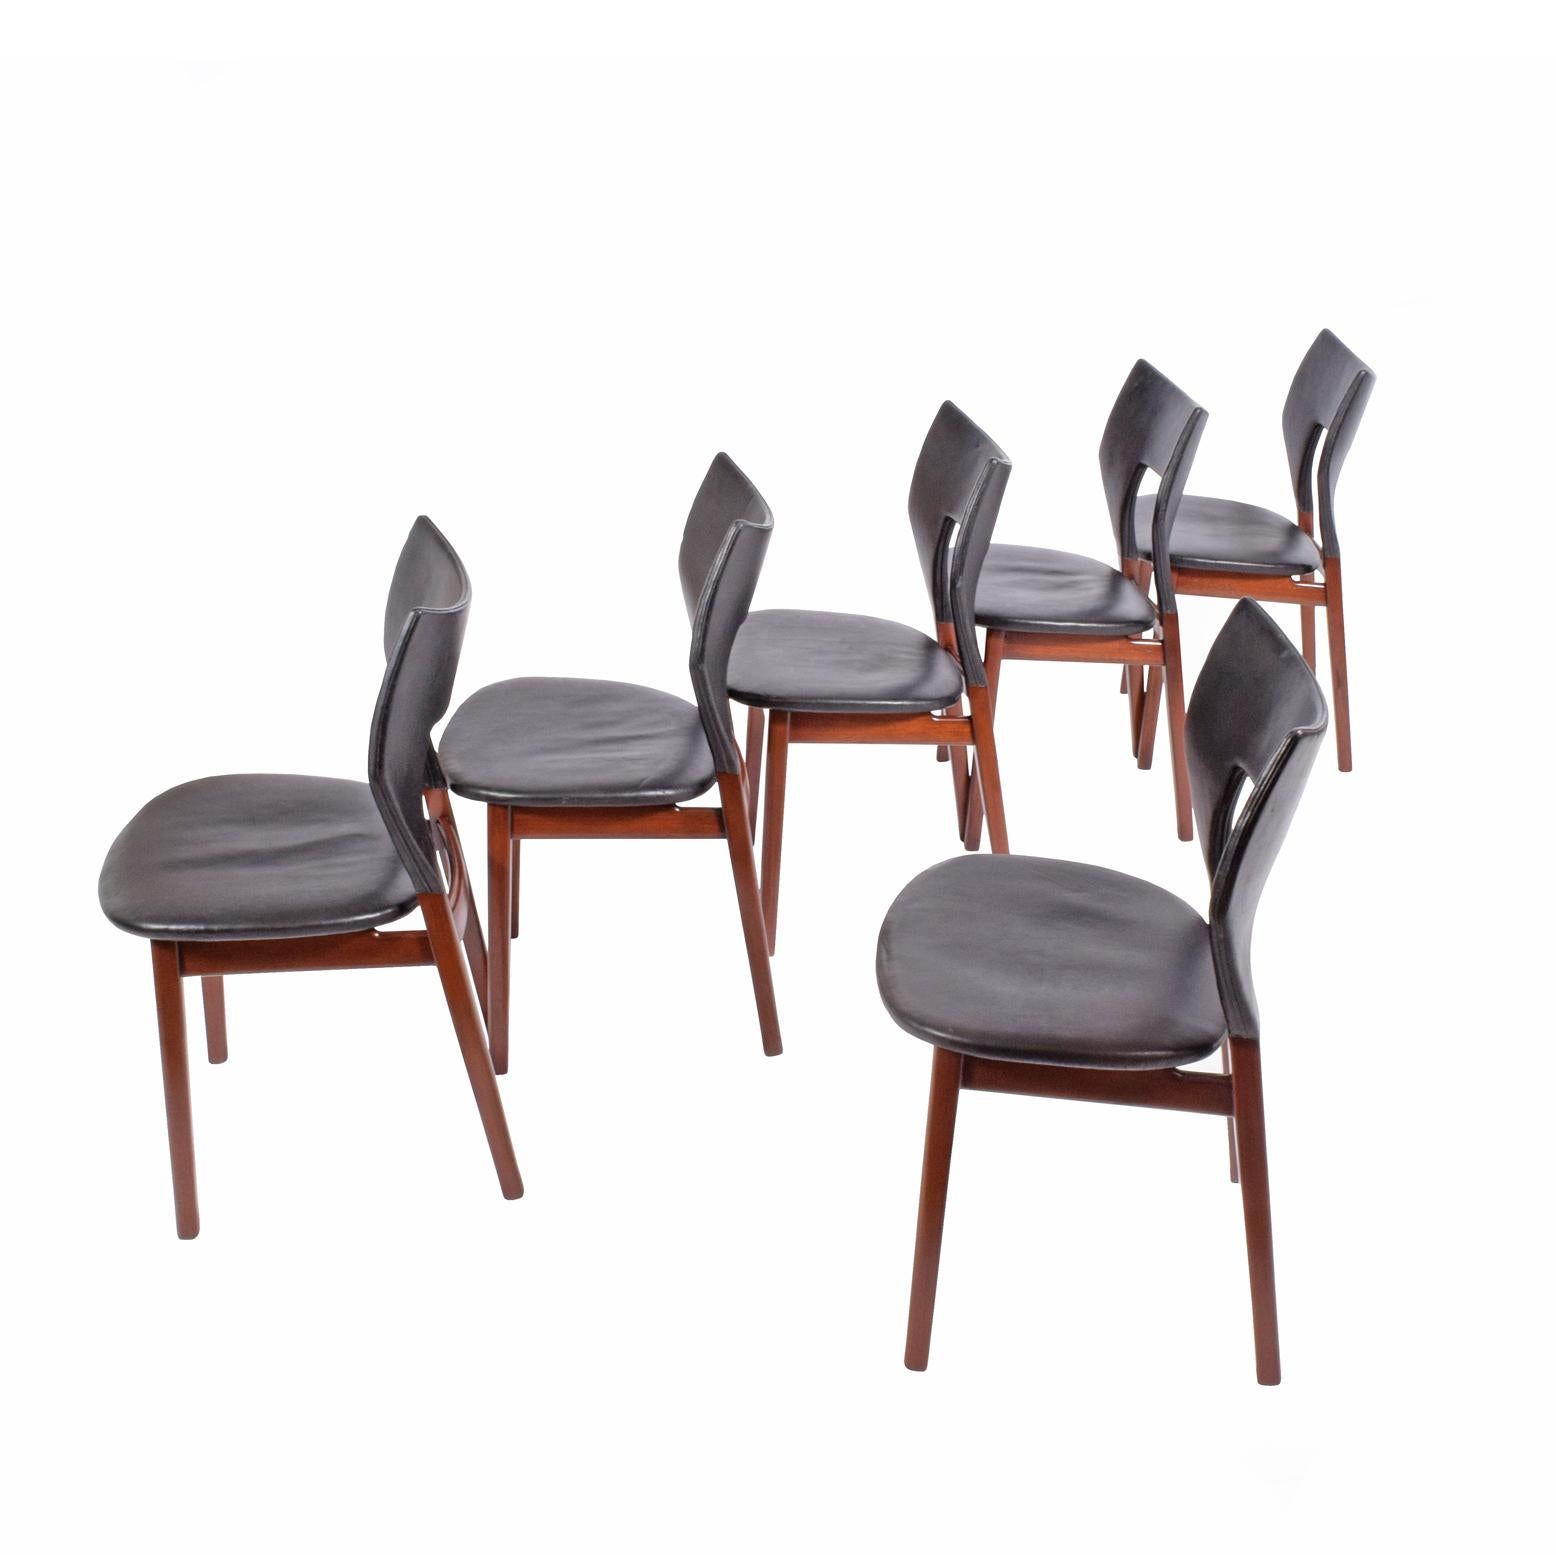 Solid teak rare set of six dining chairs design for cabinet maker Thorald Madsen by Tove & Edvard Kind- Larsen in 1960 first time exhibit at the Guild Exhibition each chair marked with metal tag original leather.